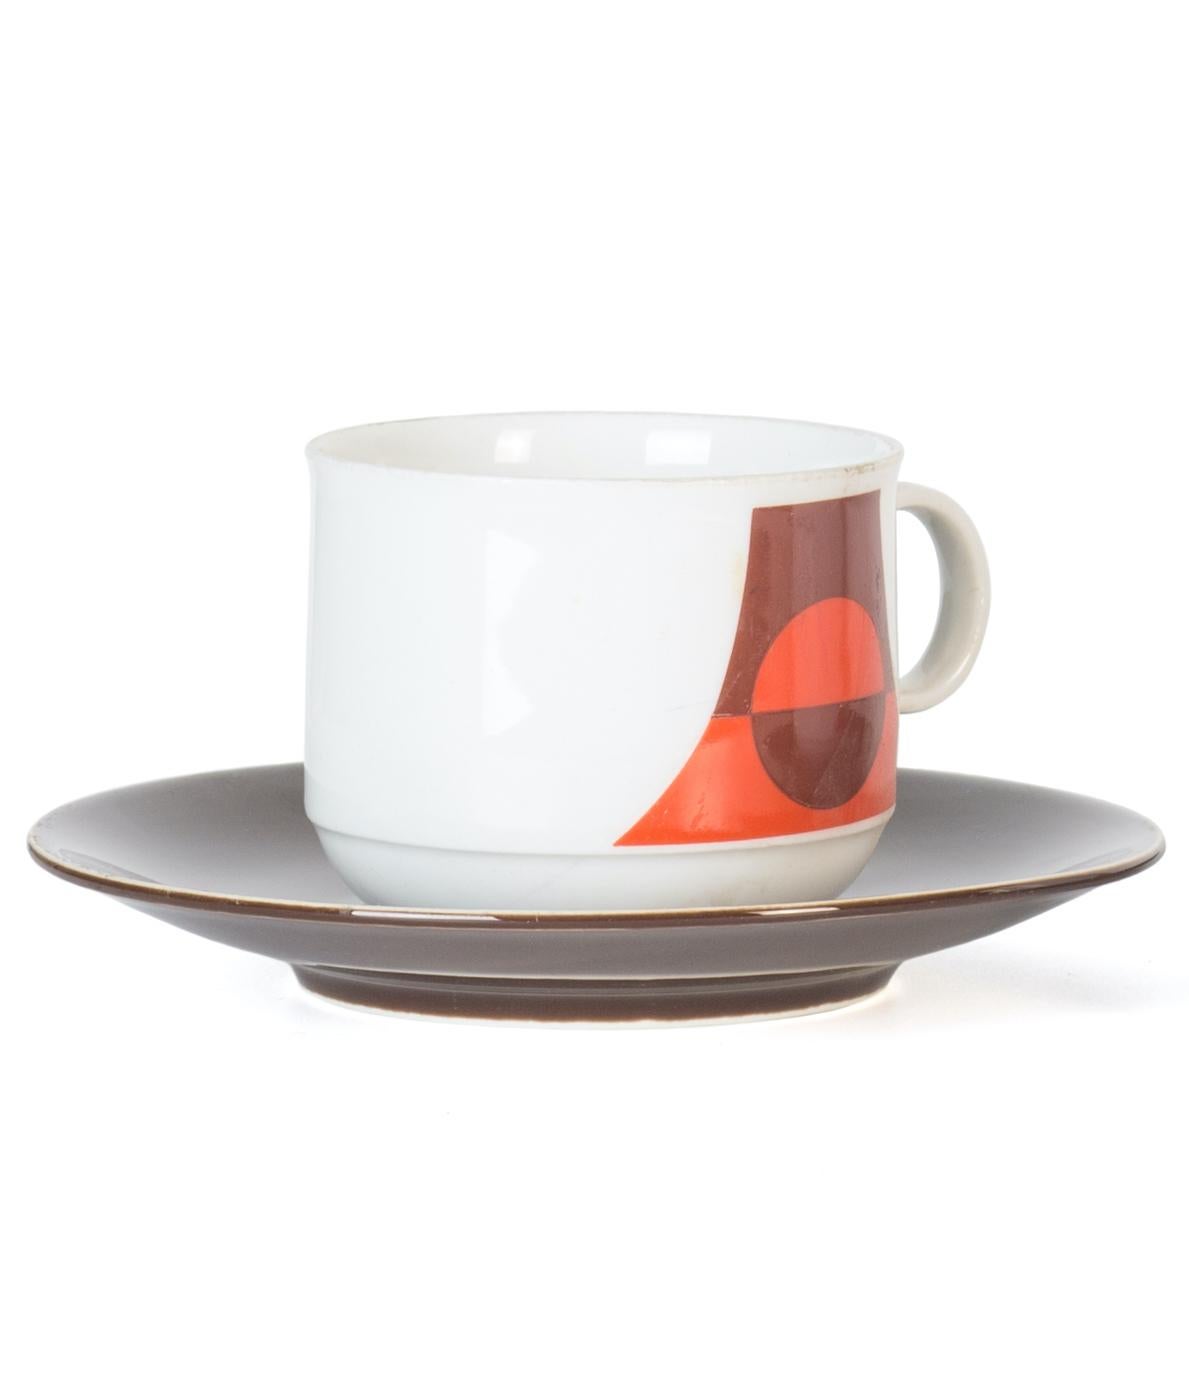 Seltmann Weiden coffee set is an elegant porcelain decorative set, realized during the 1970s century by Seltmann Weiden Bavaria

This is a very elegant coffee set decorated with geometric orange and brown decoration.

Service includes:

4